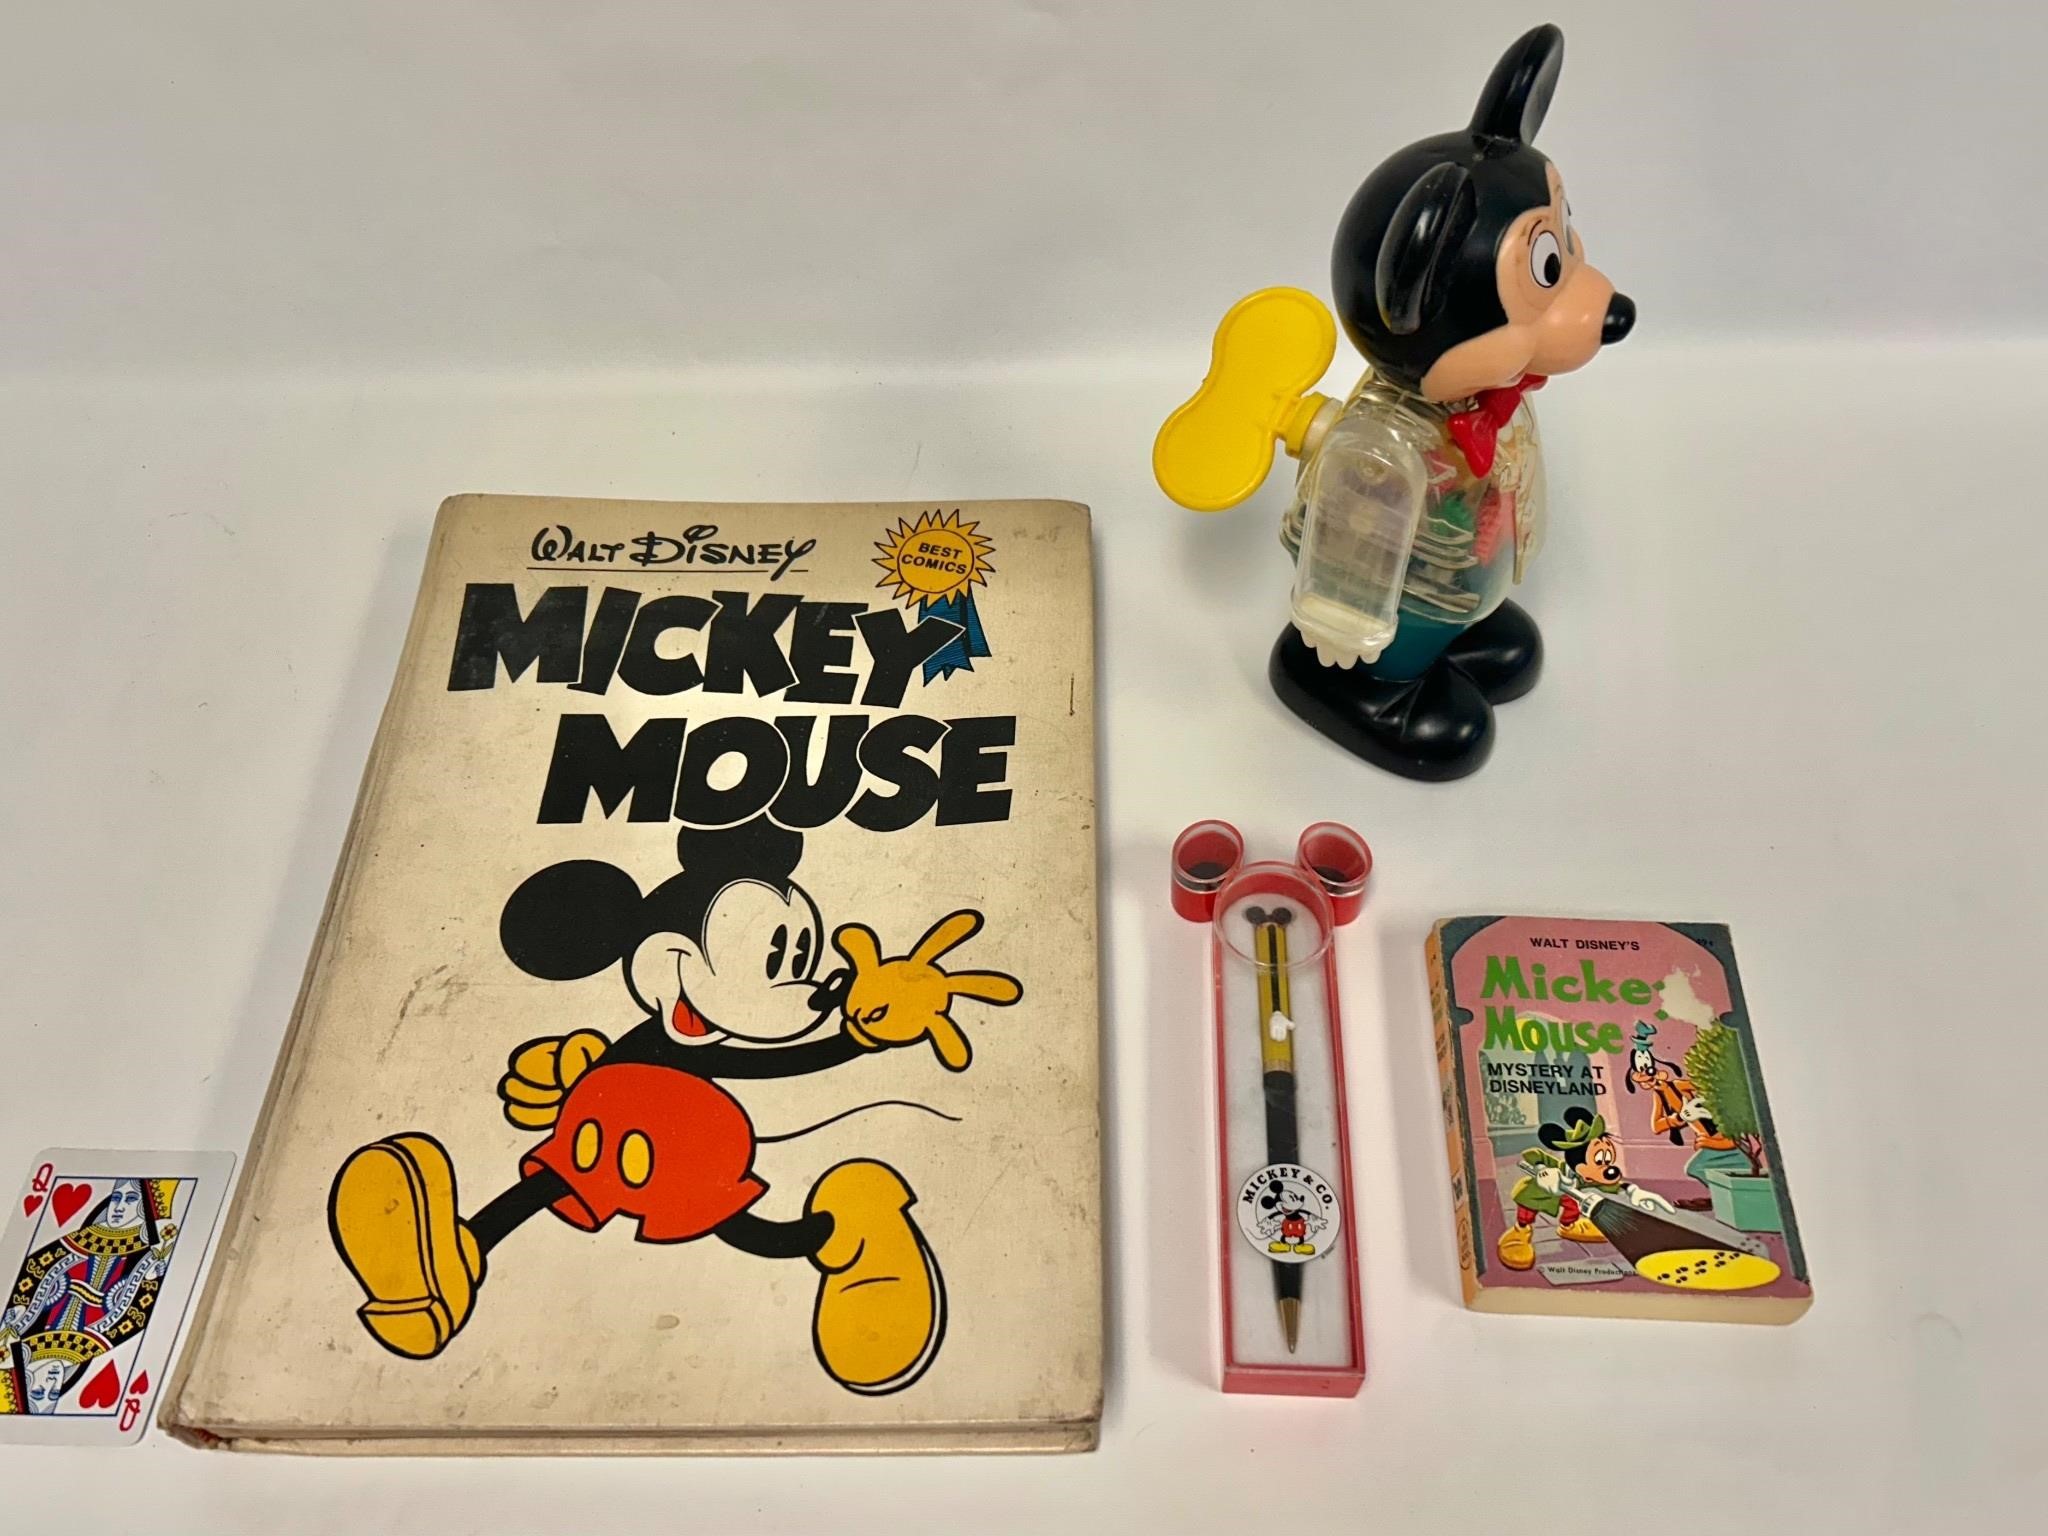 Vintage Mickey Mouse collector items. Large comic